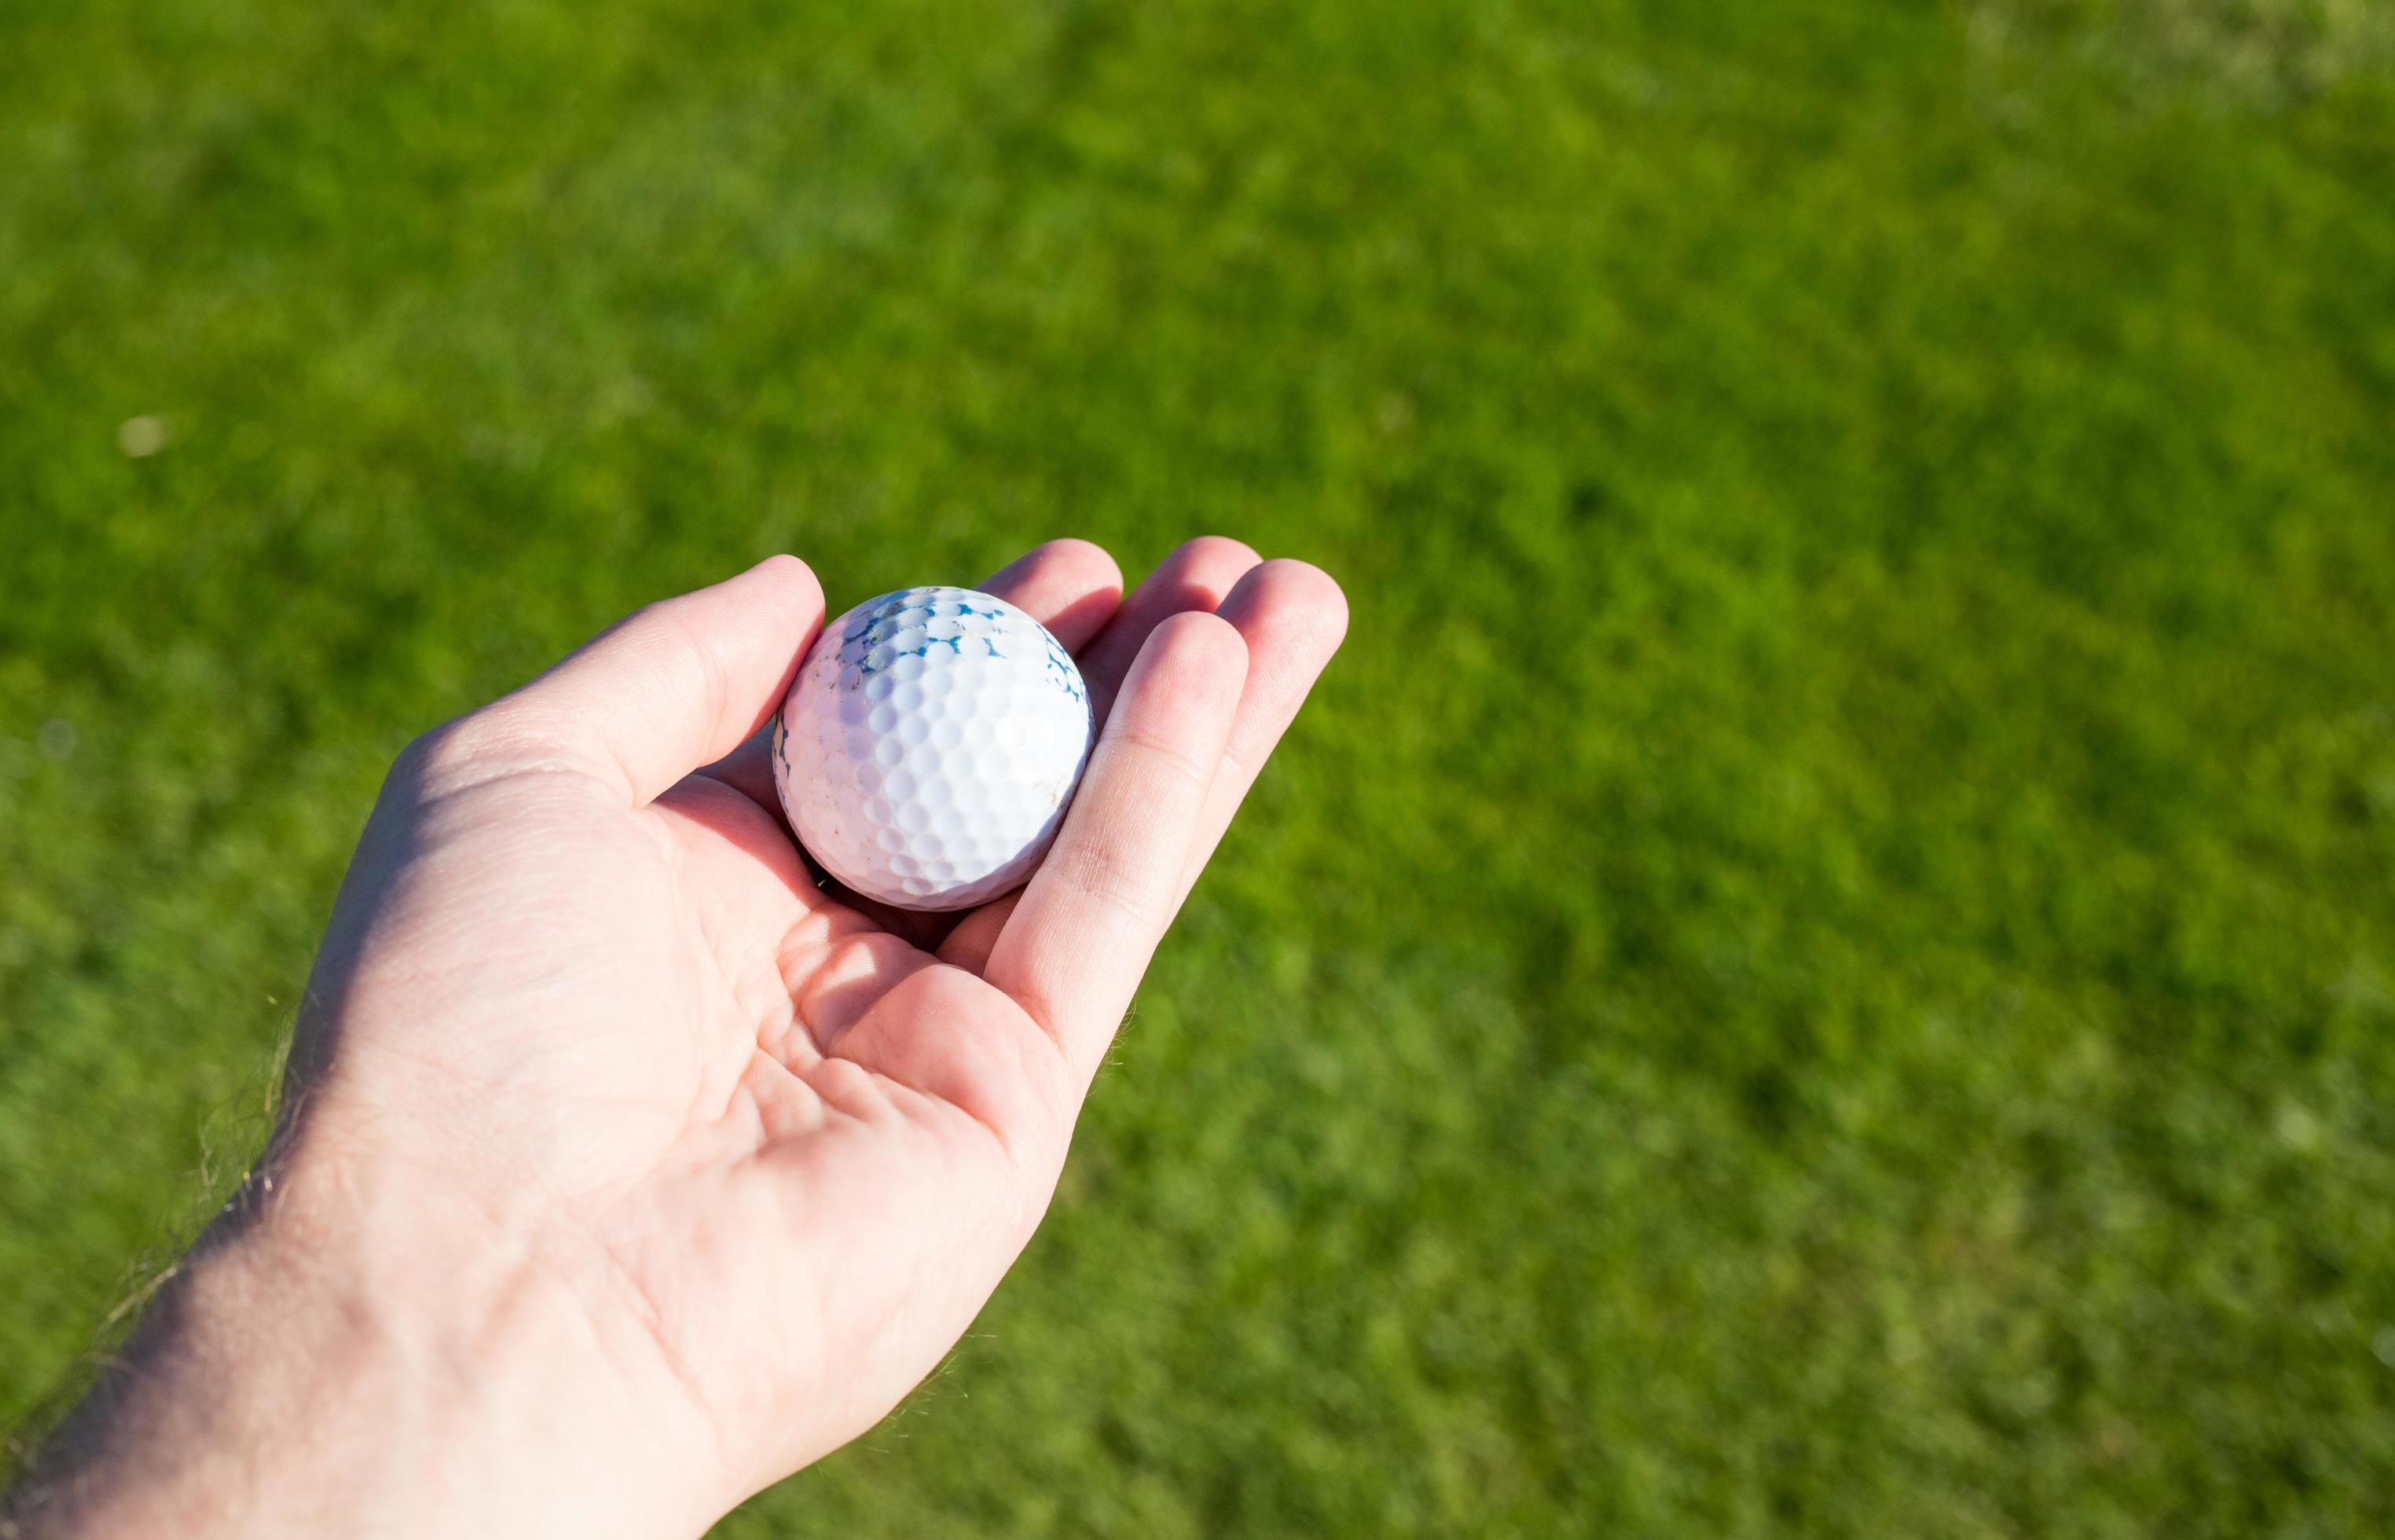 golf-ball-held-in-hand-on-the-golf-course-golf-concept-free-photo.jpg